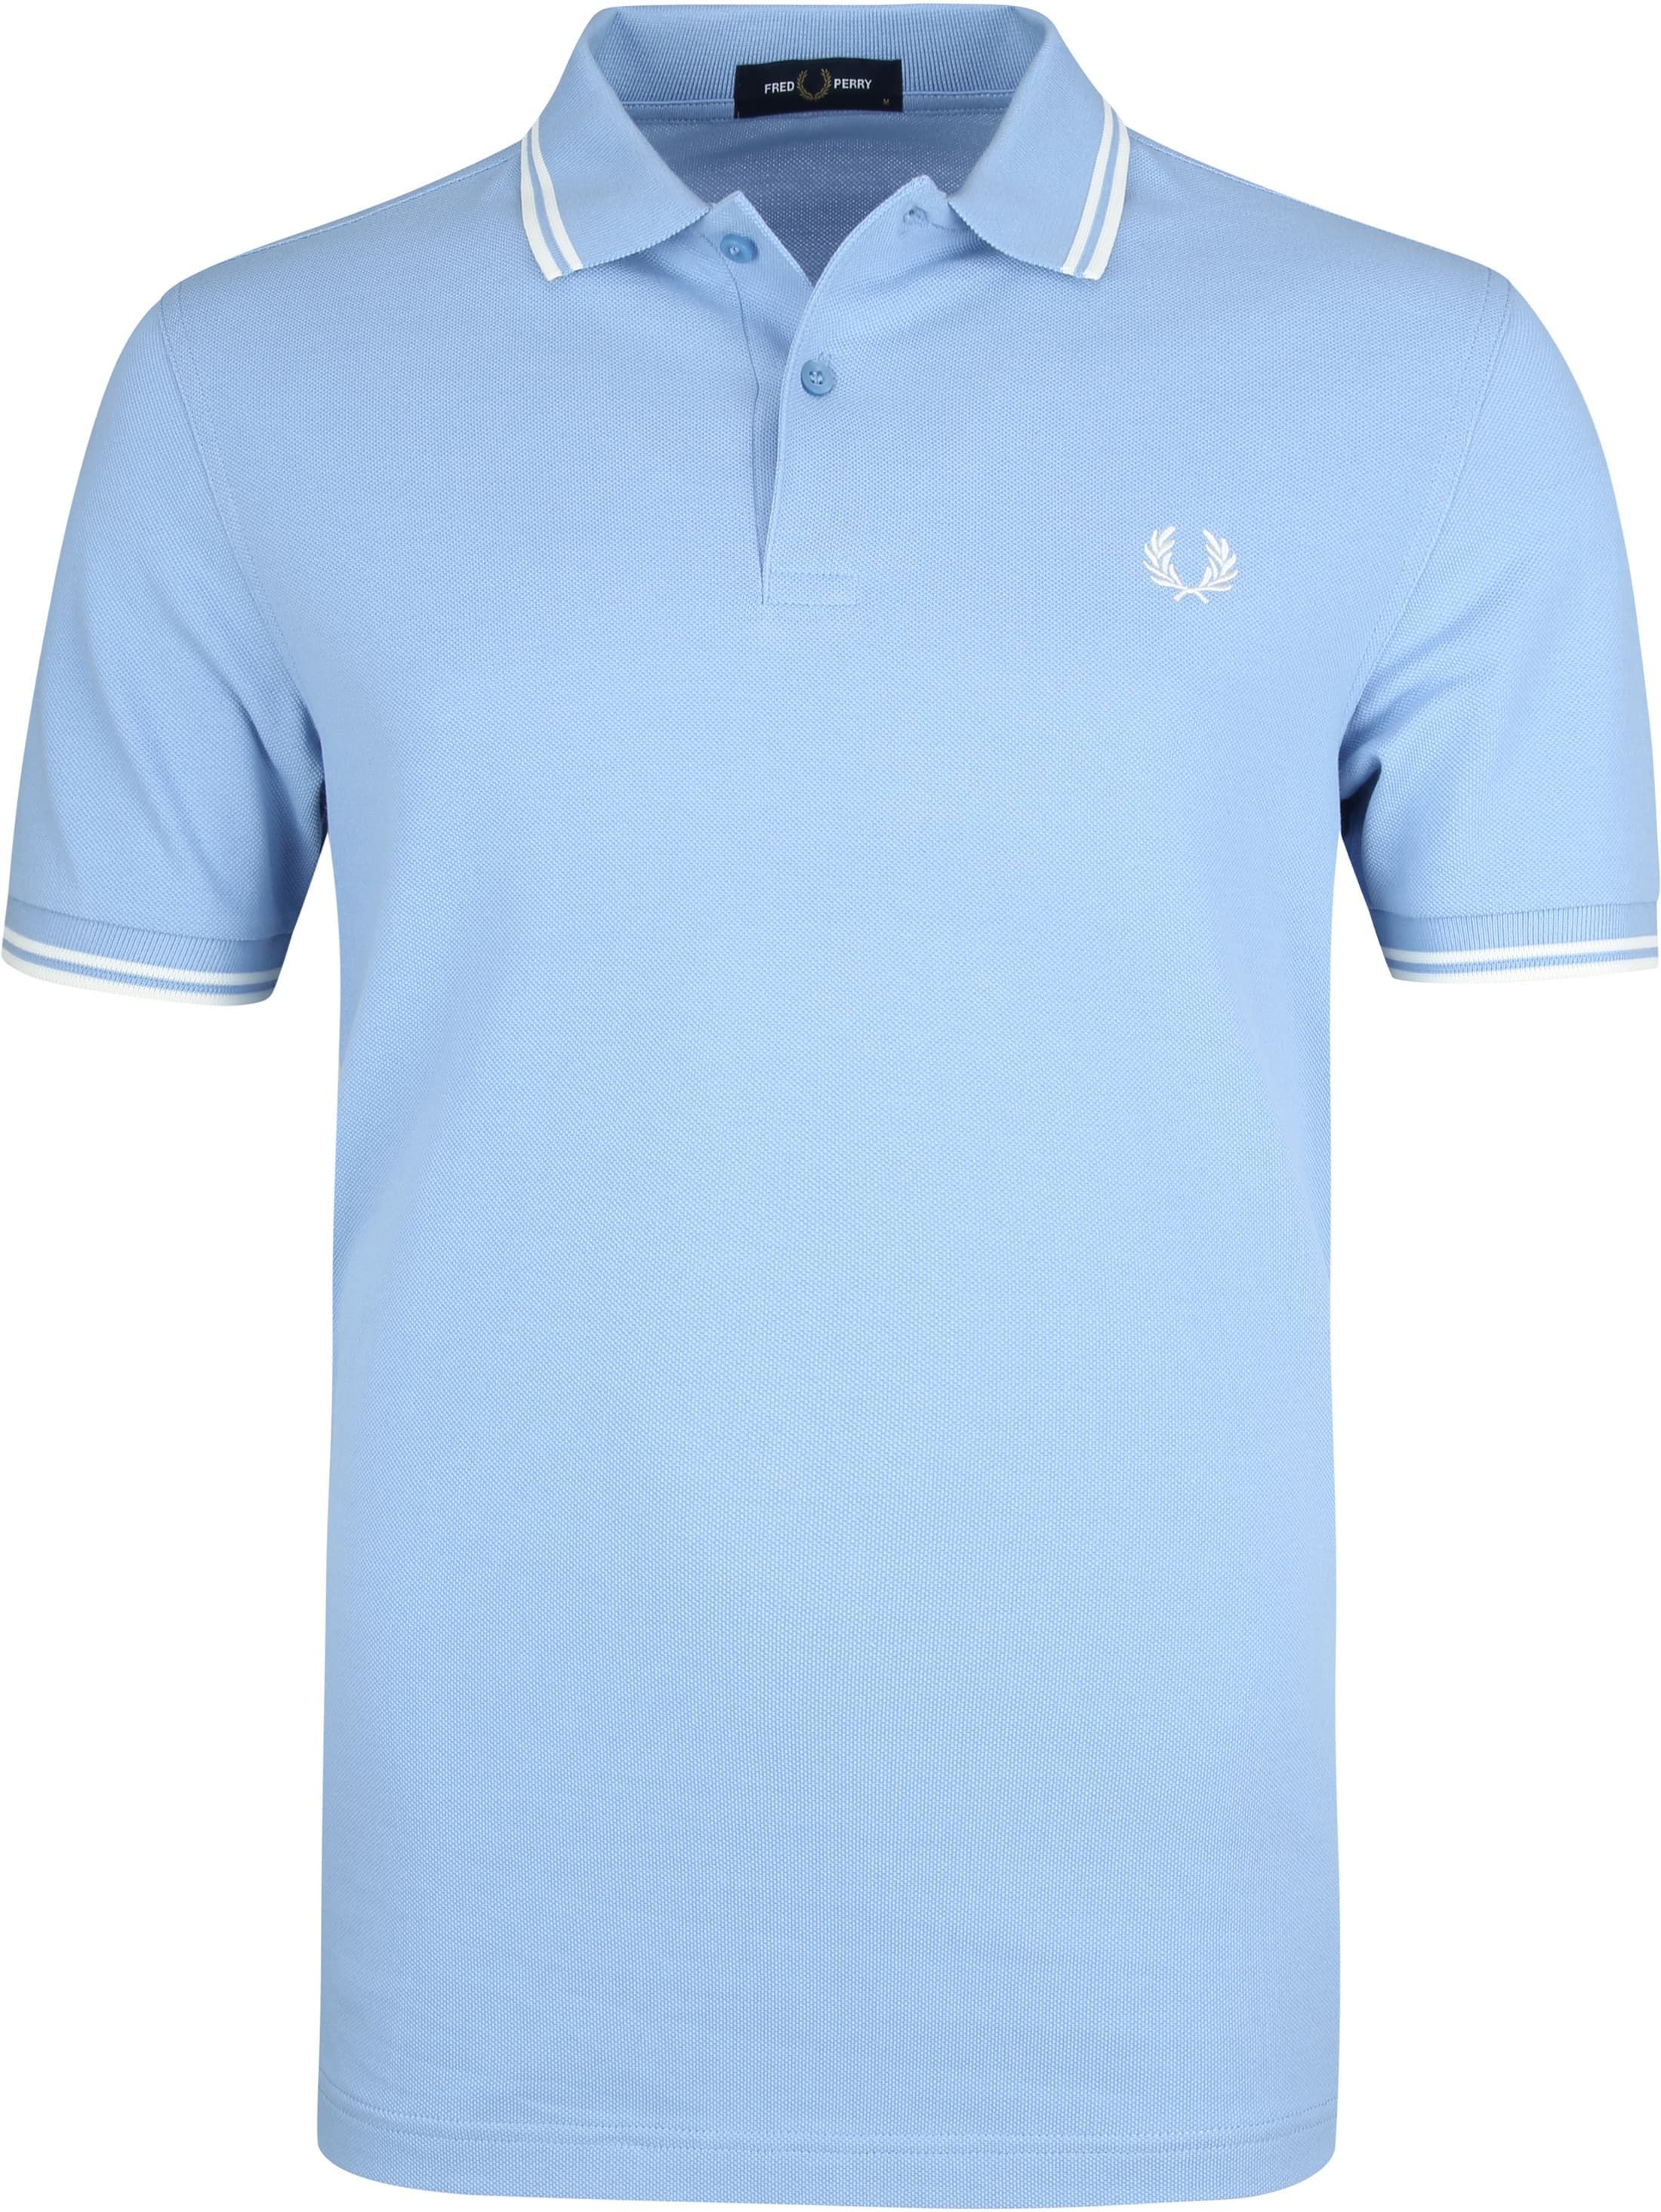 Fred Perry Poloshirt Light L15 Blue size 3XL